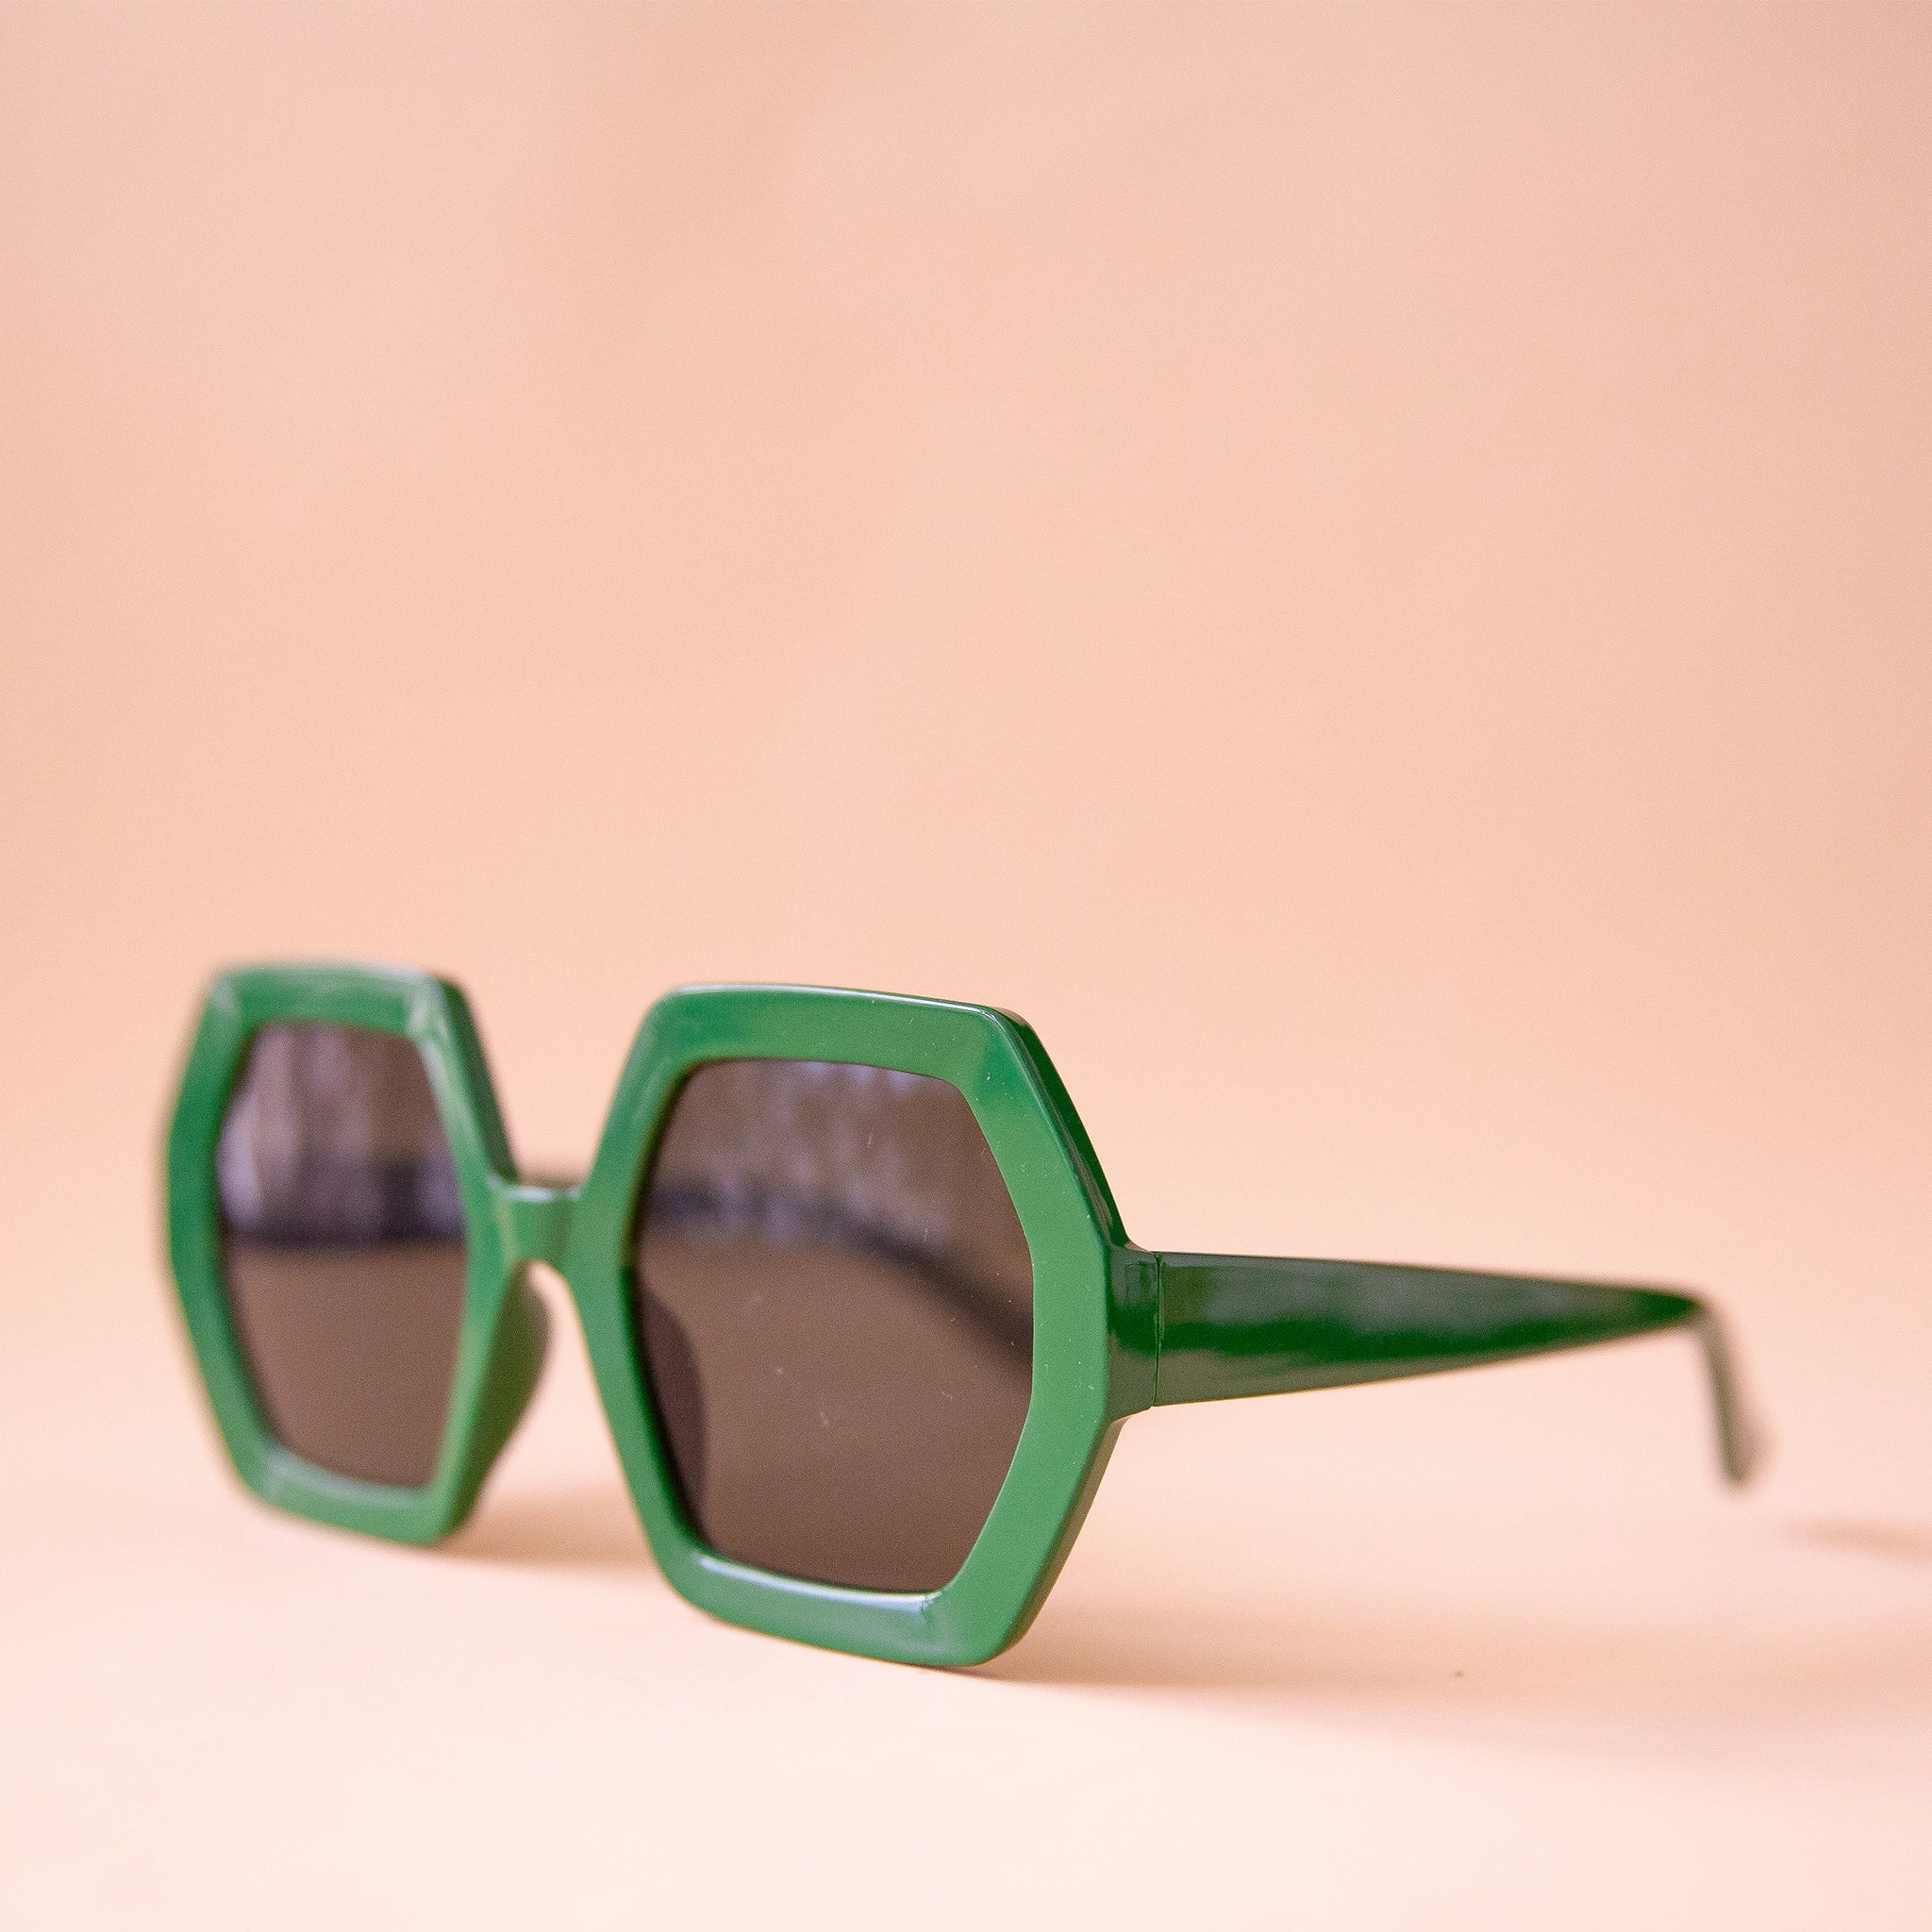 On a peachy background is a pair of hexagon shaped plastic sunglasses in an emerald green color with a dark brown lens.